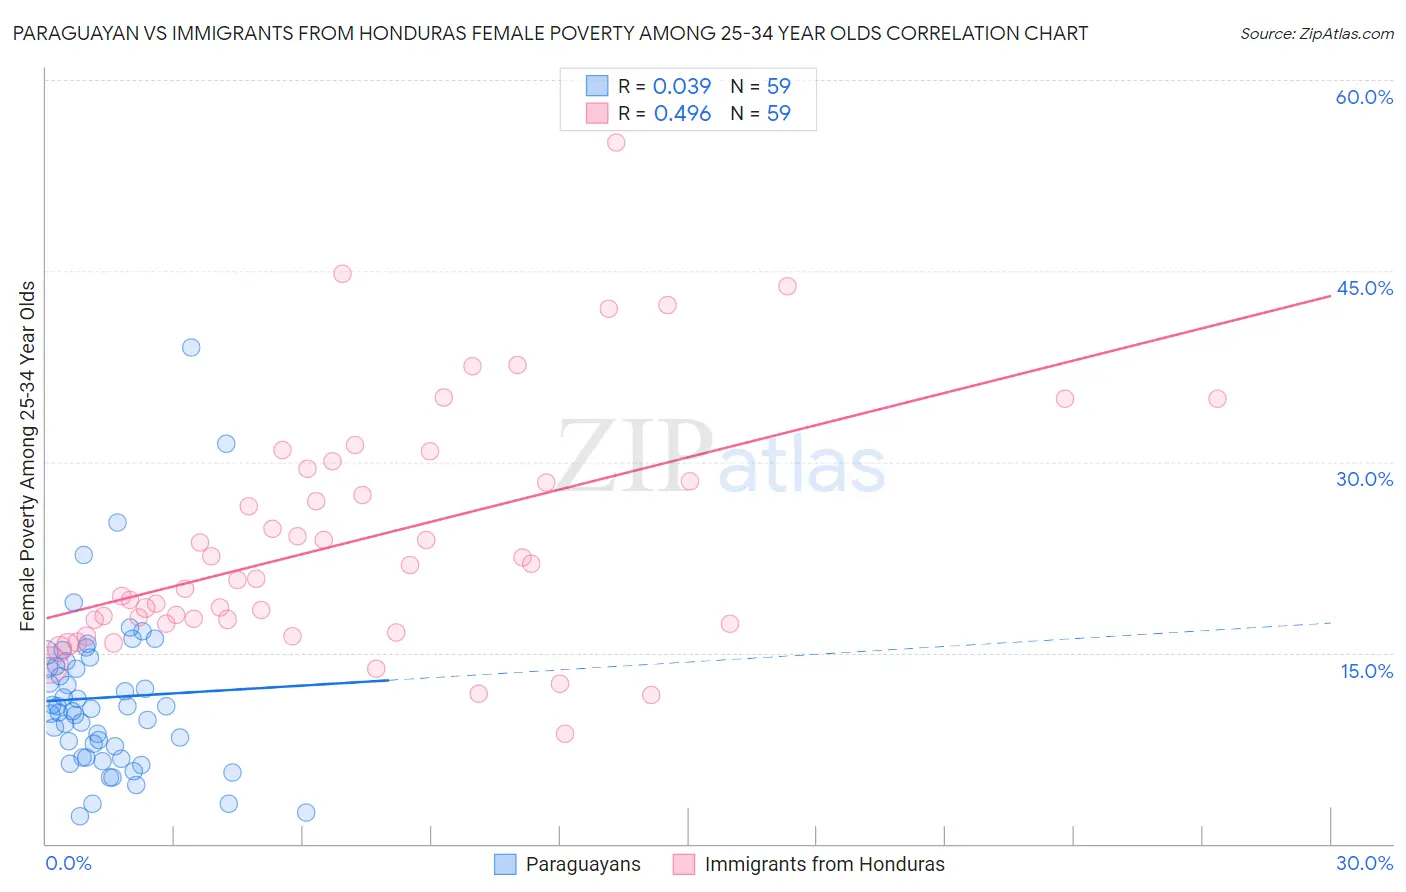 Paraguayan vs Immigrants from Honduras Female Poverty Among 25-34 Year Olds